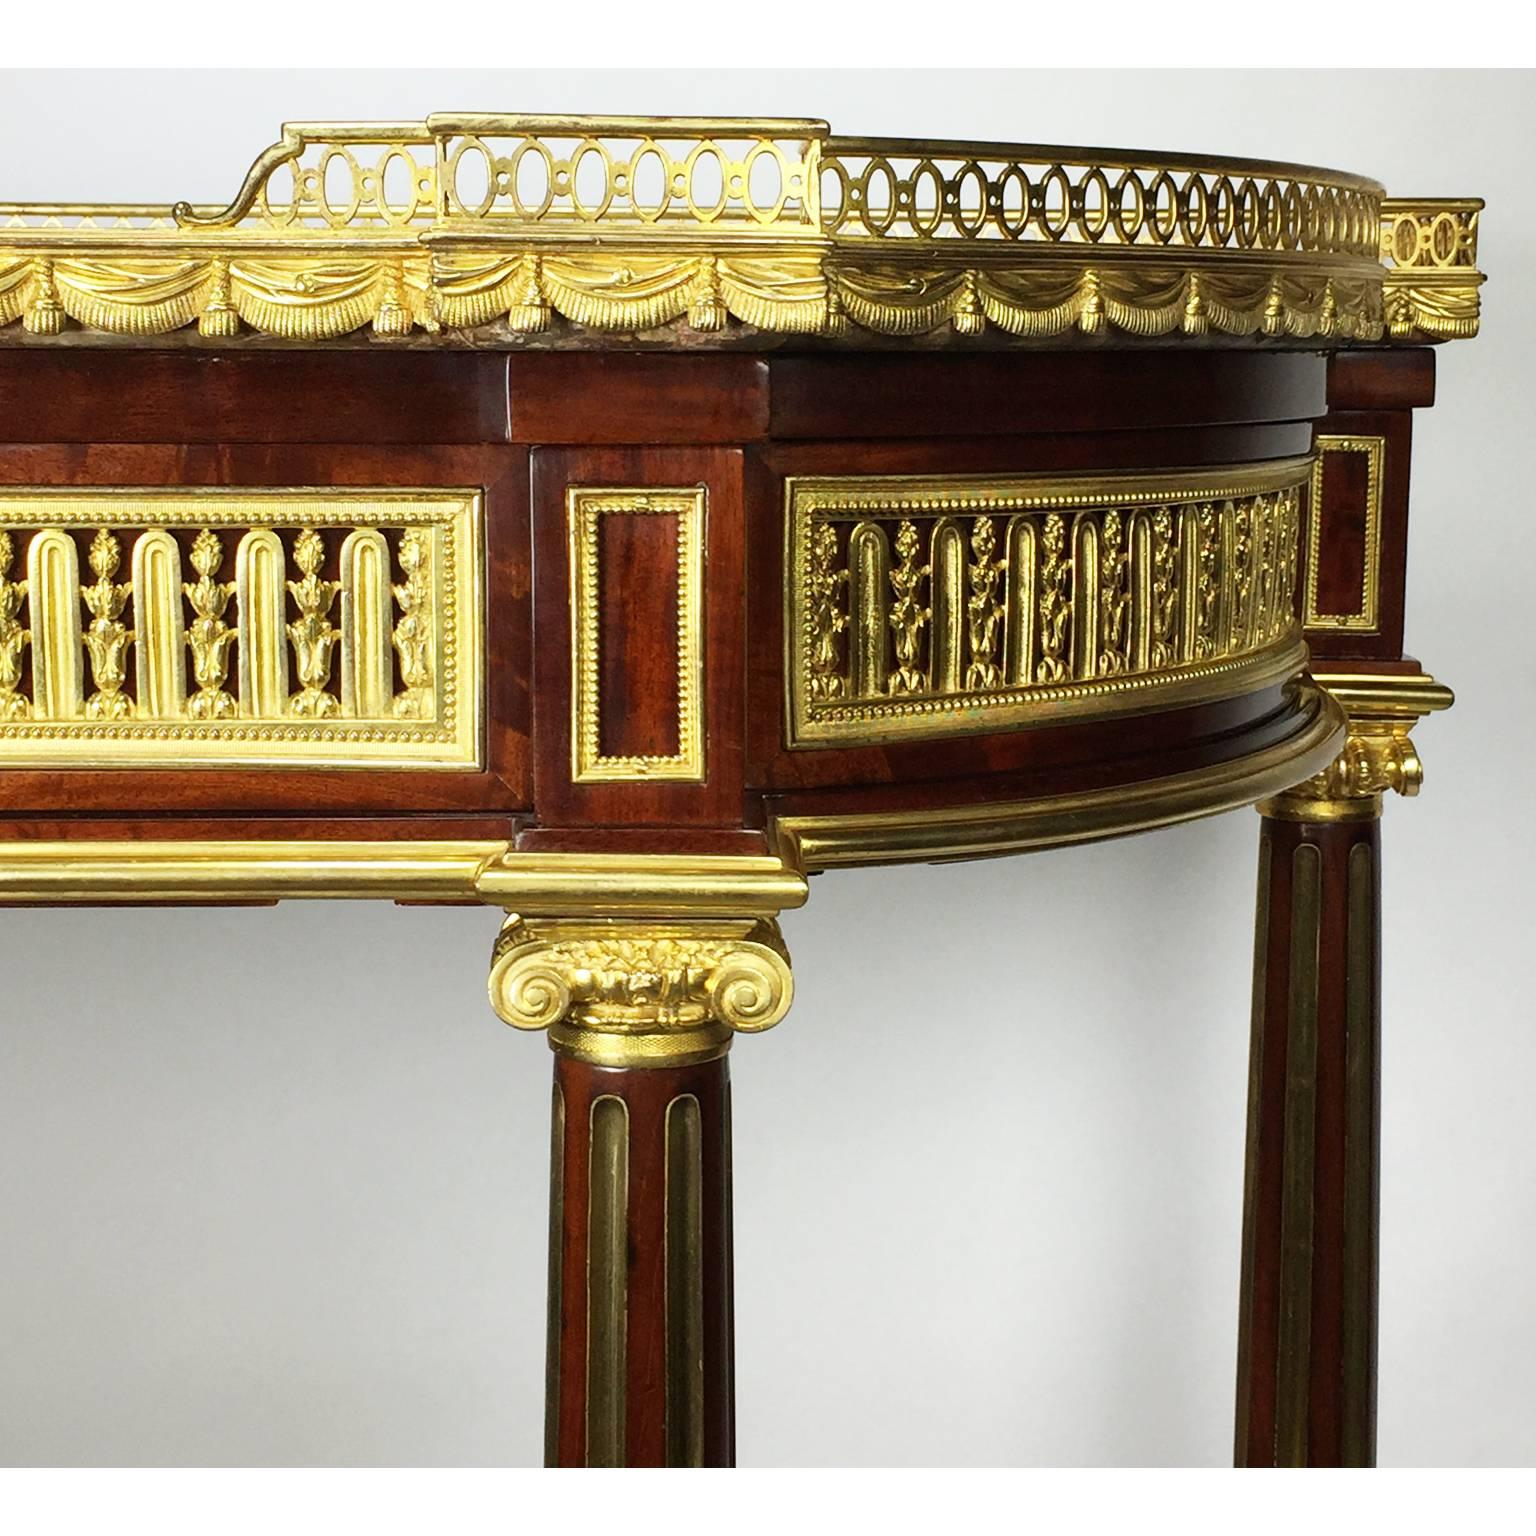 French 19th Century Louis XVI Style Gilt Bronze-Mounted Two-Tier Demilune Console